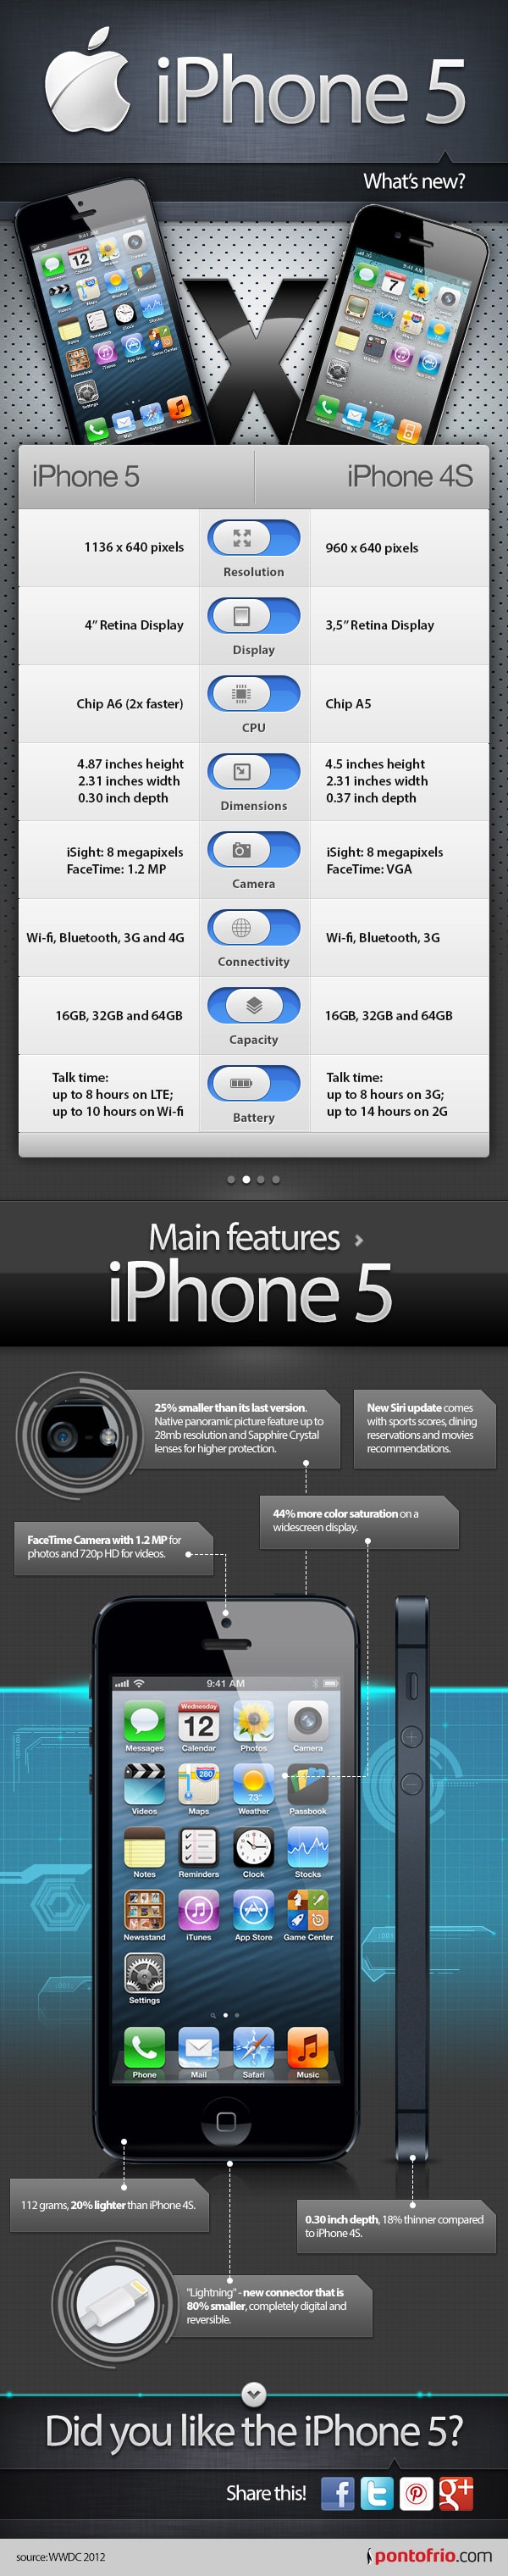 iphone-5-review-specs-infographic